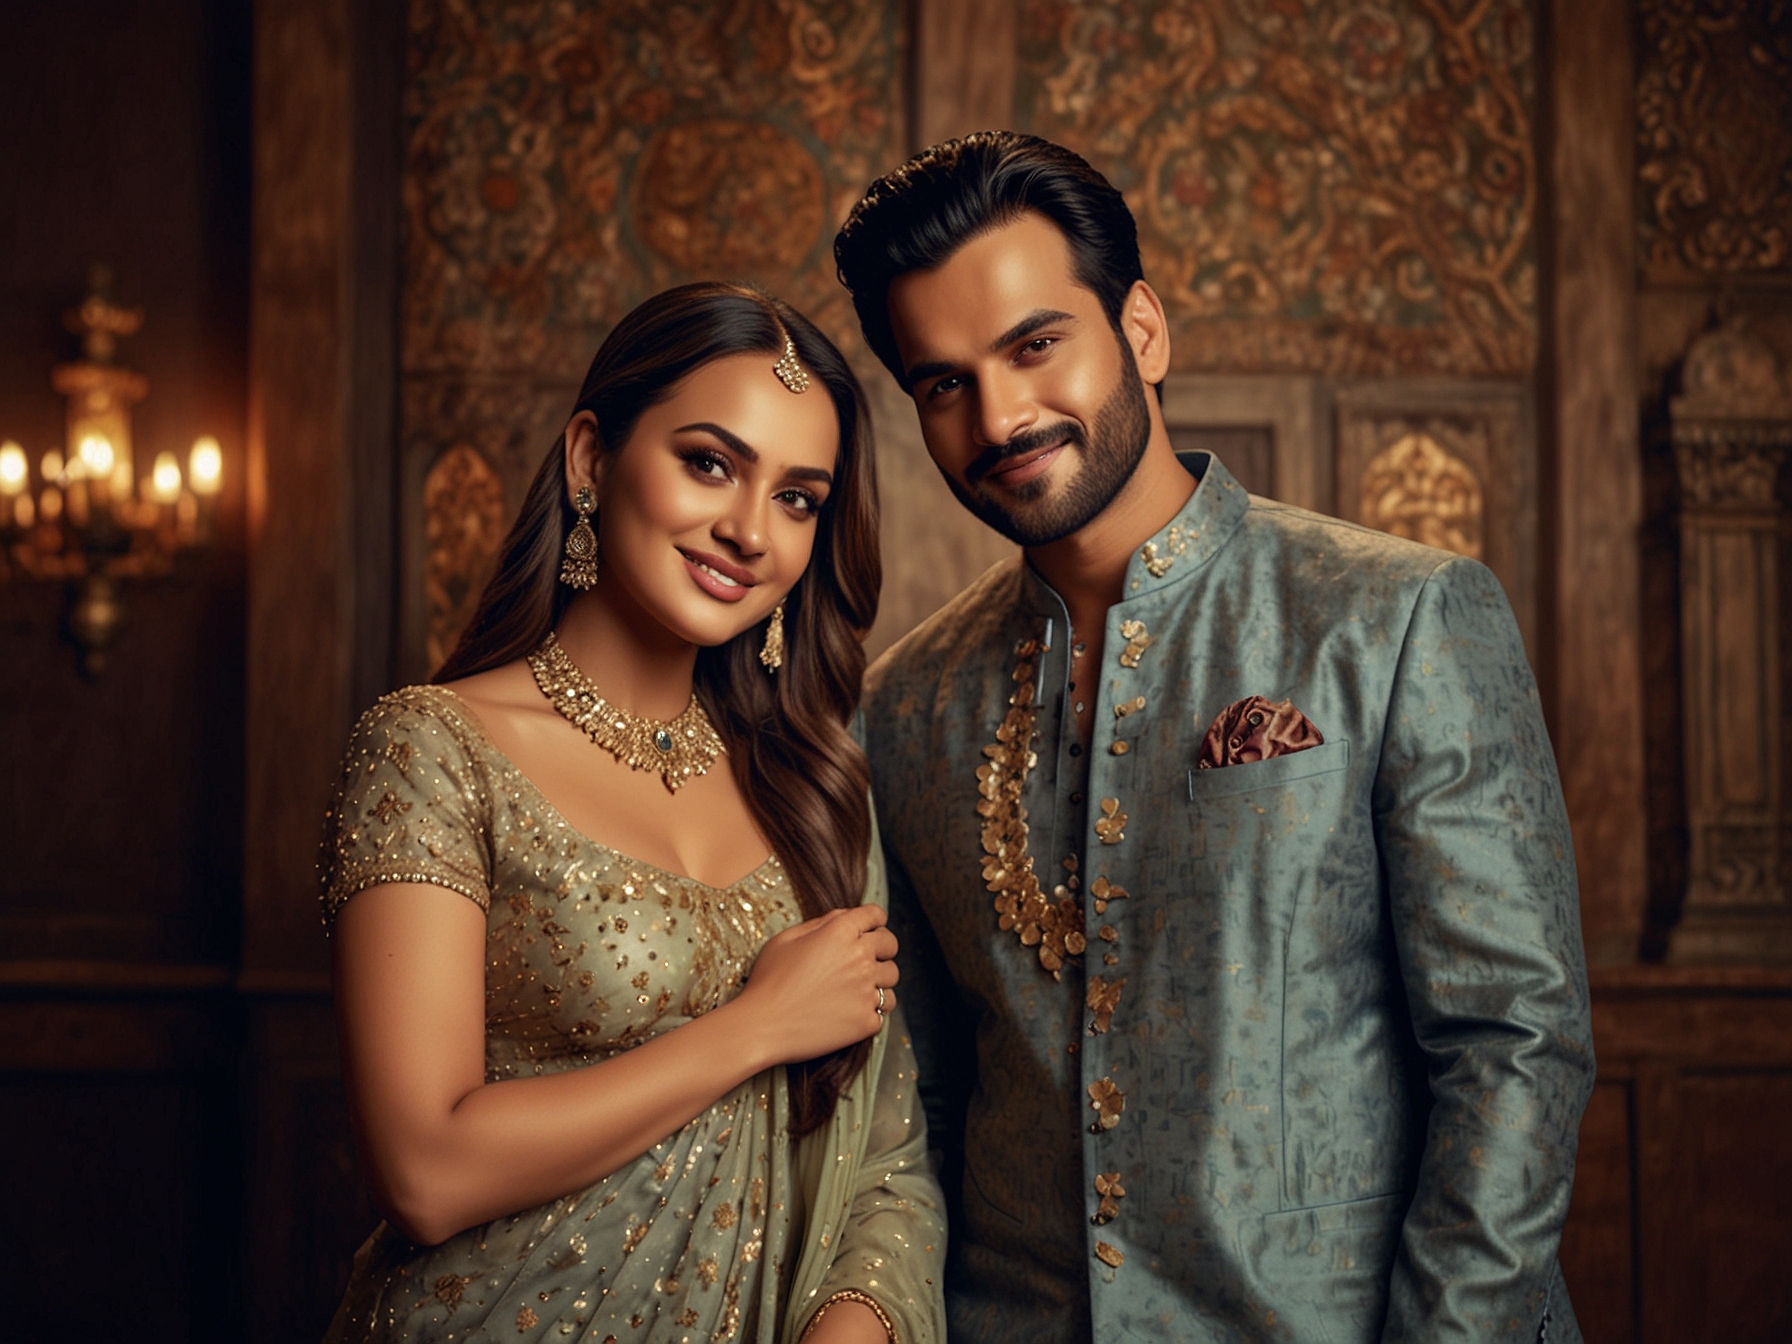 Sonakshi Sinha and Zaheer Iqbal pose together at their pre-wedding party, exuding elegance and chemistry. Sonakshi wears a stunning traditional outfit, while Zaheer looks dapper.